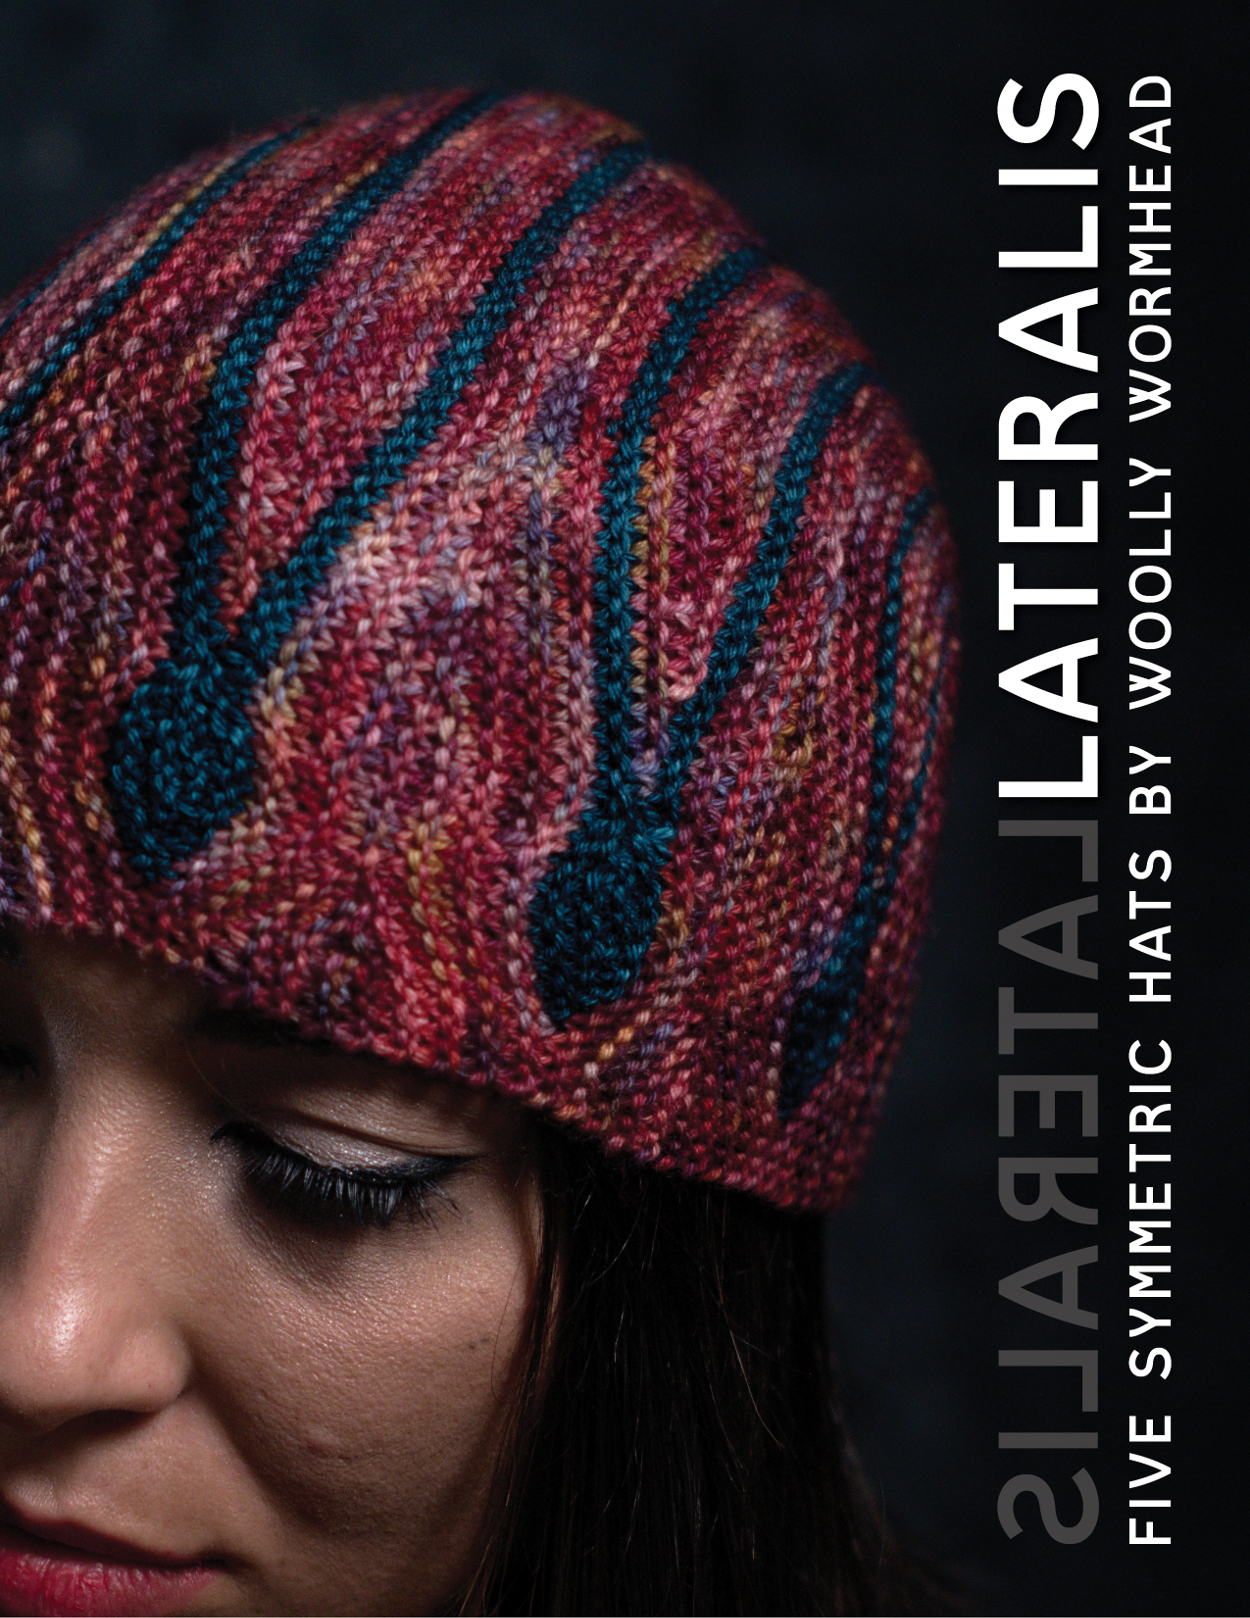 Lateralis special collection of sideways knit symmetrical hats